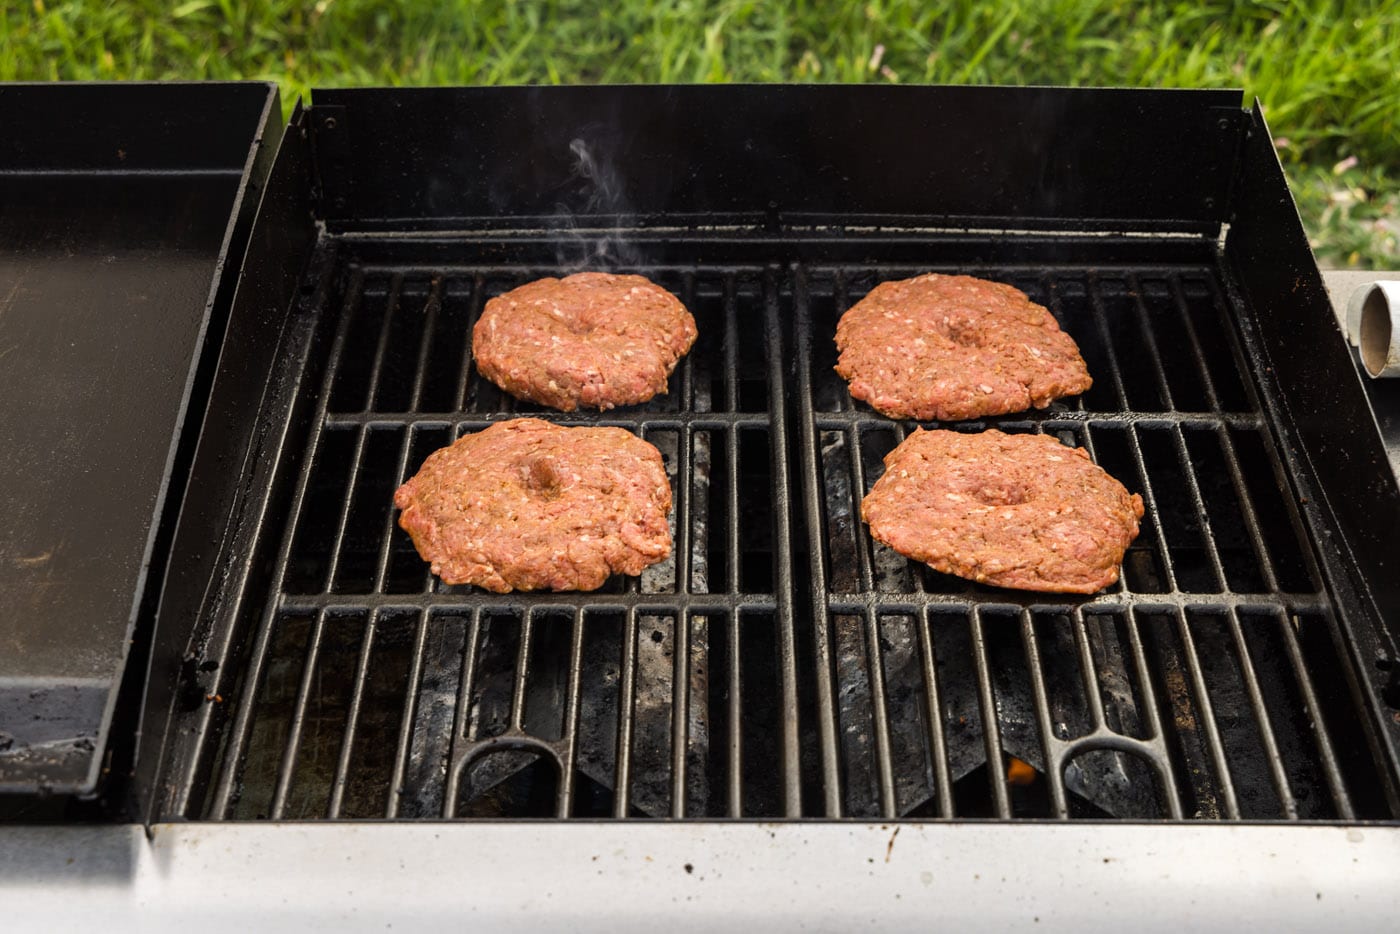 burger patties cooking on a grill grate